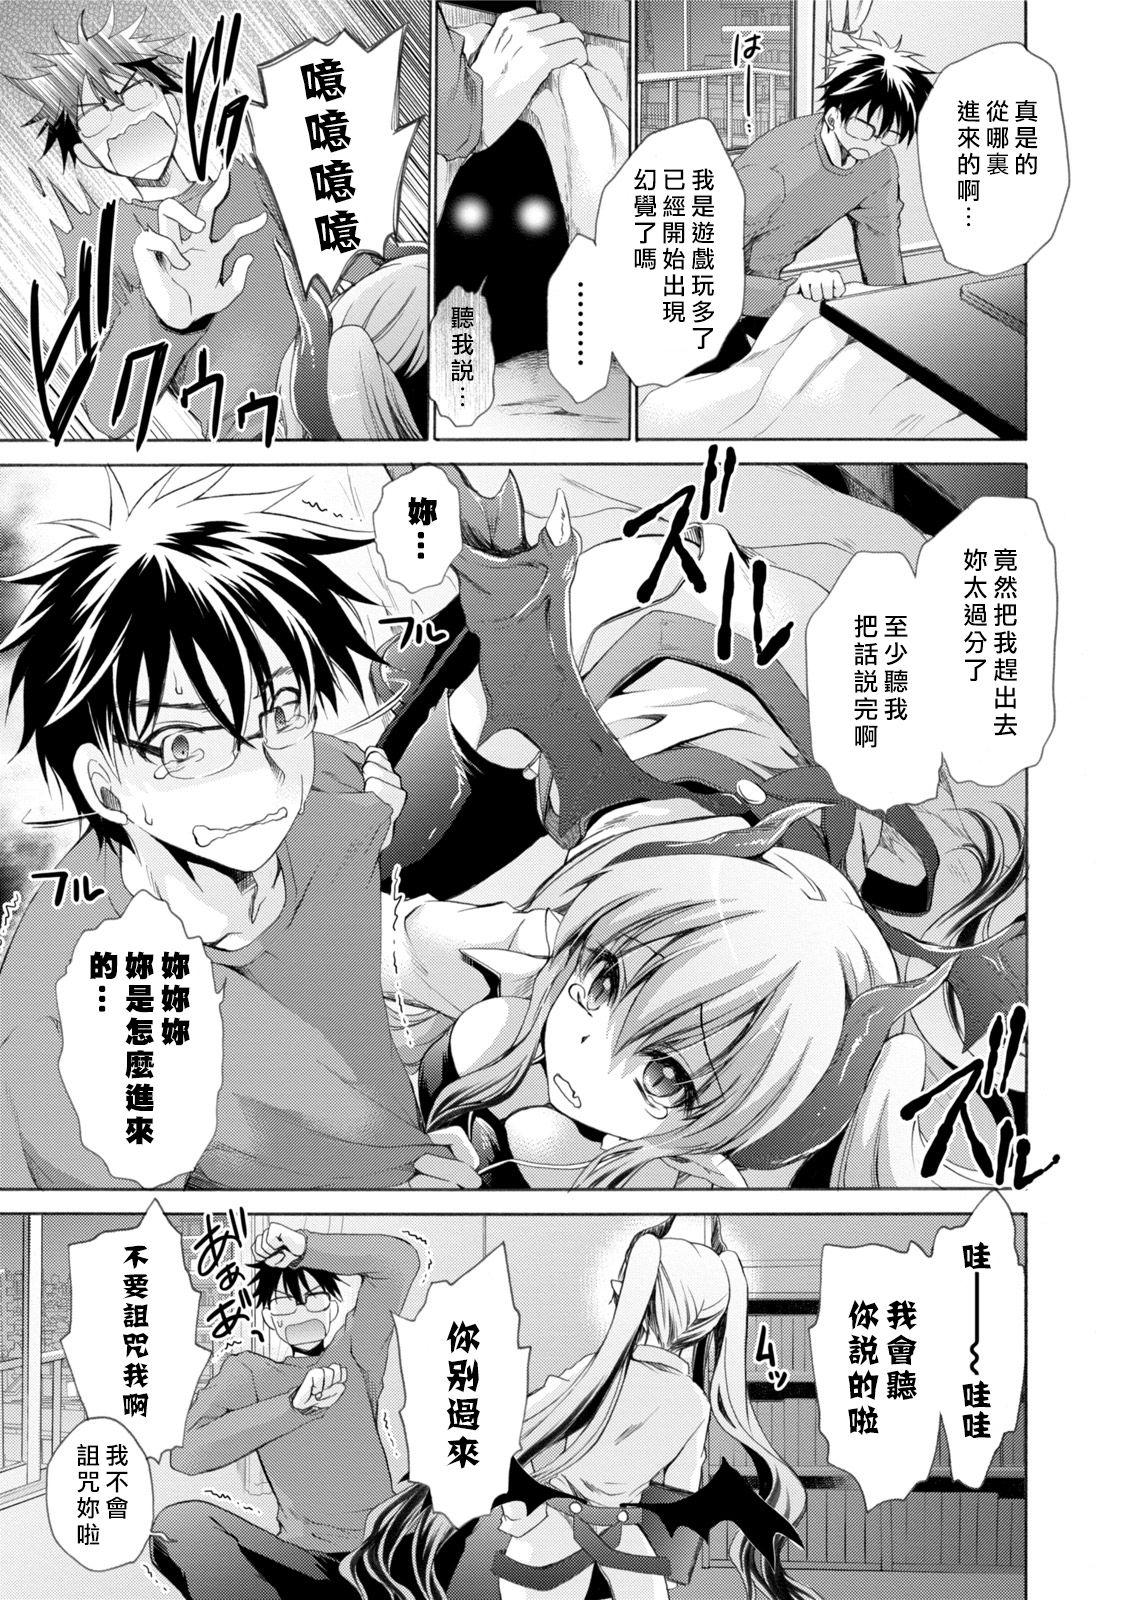 Old And Young Ore to Kanojo to Owaru Sekai - World's end LoveStory 1 Blacksonboys - Page 9